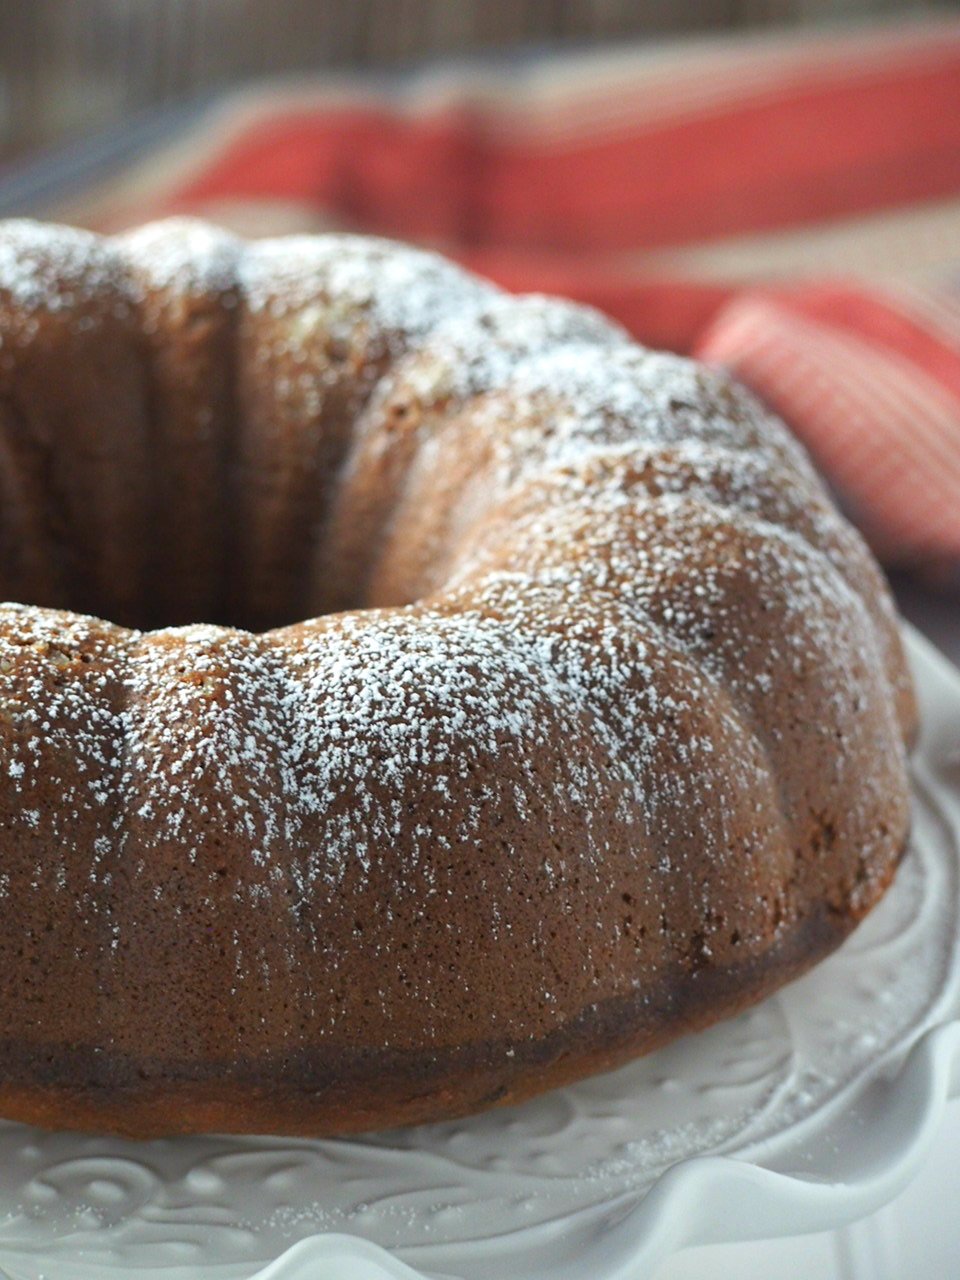 Closer view of the whole banana bundt cake on a serving plate.